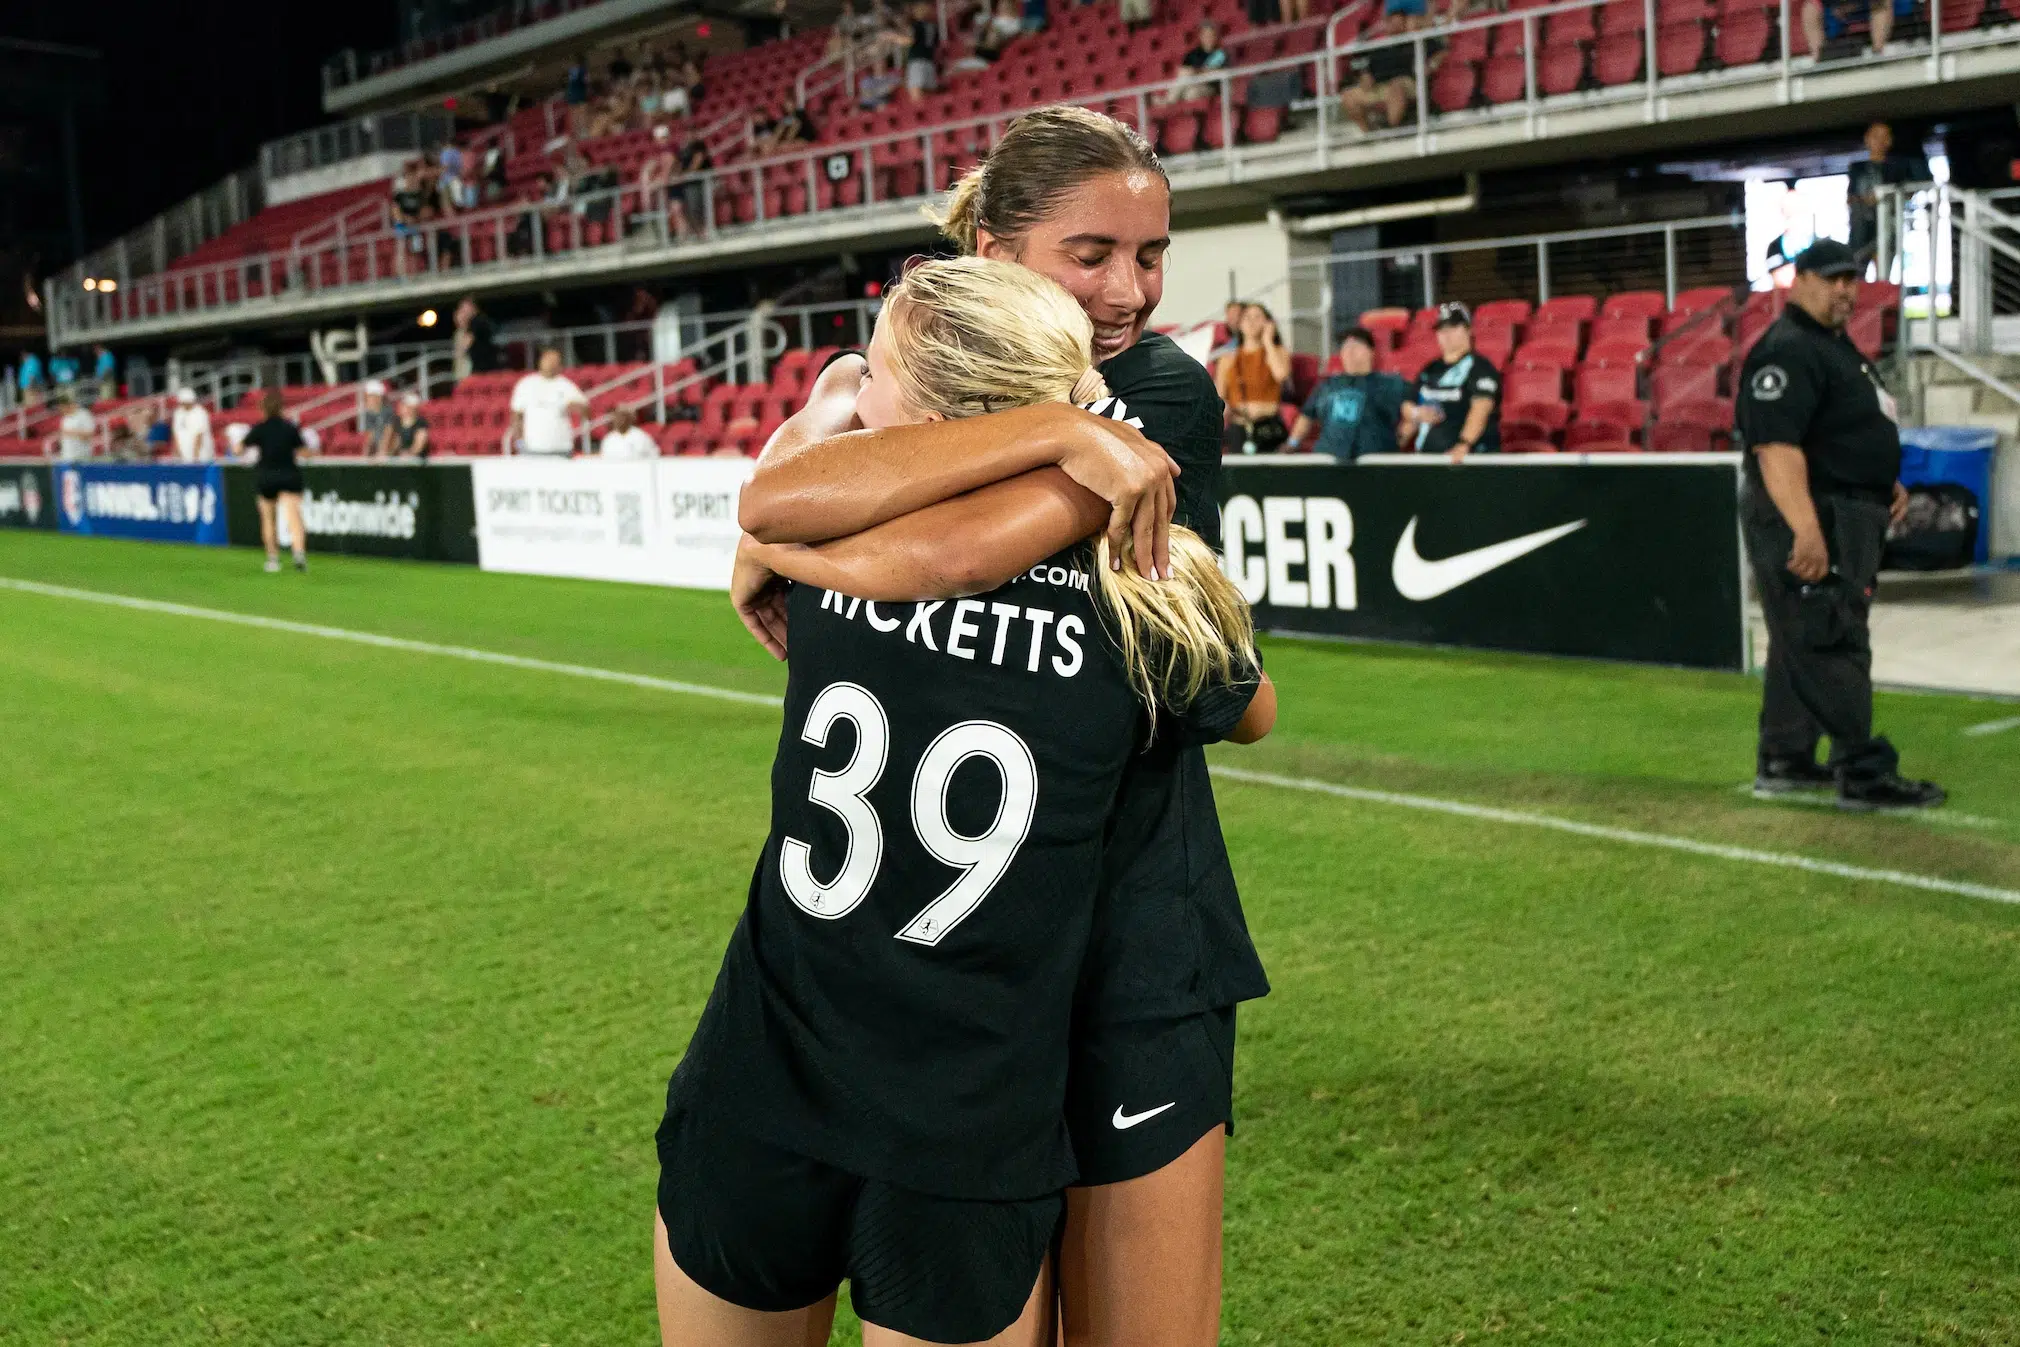 Mariana Speckmaier closes her eyes and hugs Chloe Ricketts on a soccer field. Both are in all black uniforms.